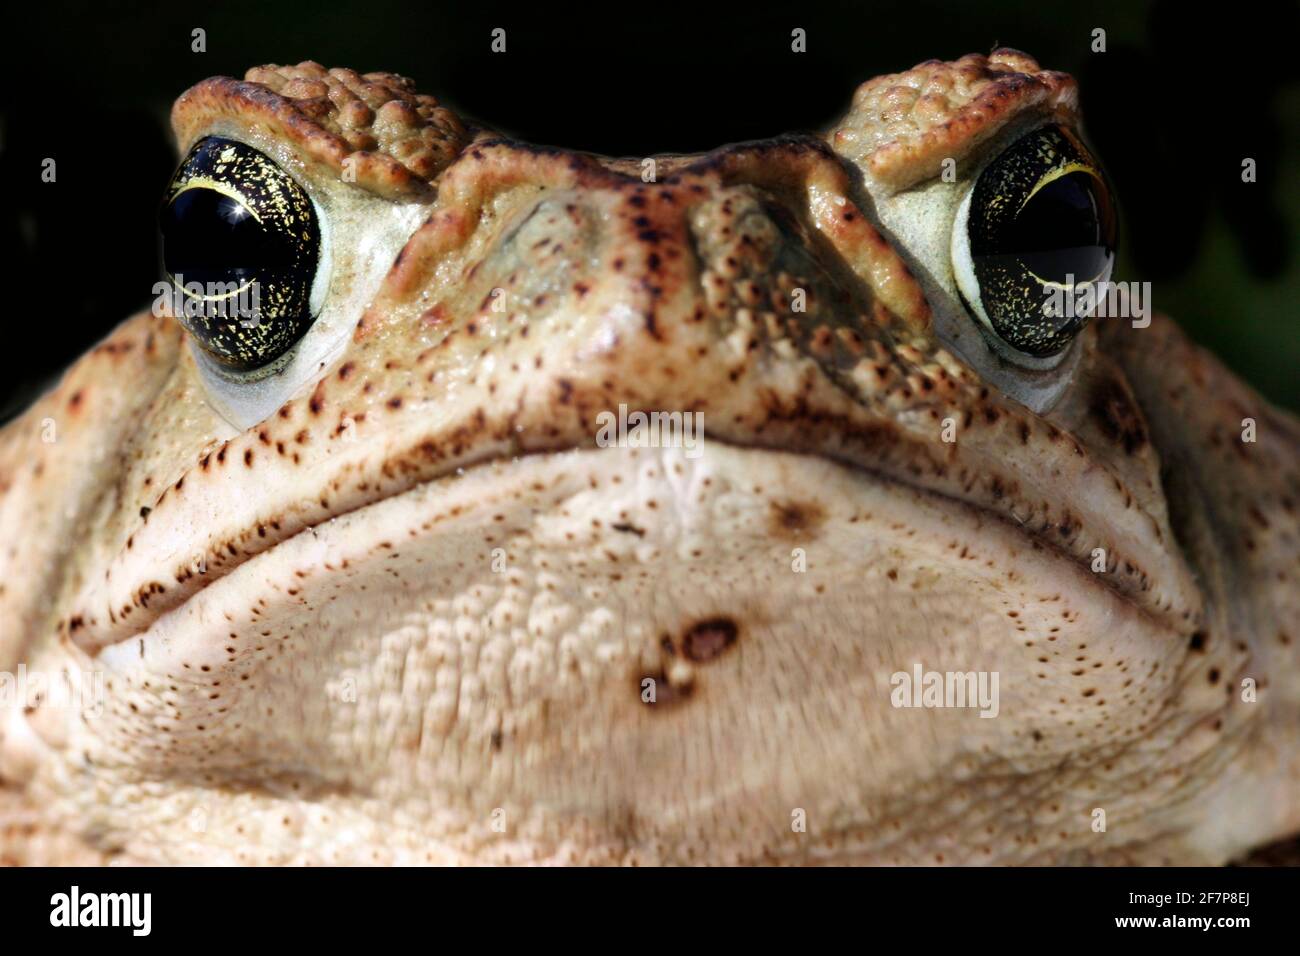 Giant toad, Marine toad, Cane toad, South American Neotropical toad (Bufo marinus, Rhinella marina), portrait Stock Photo